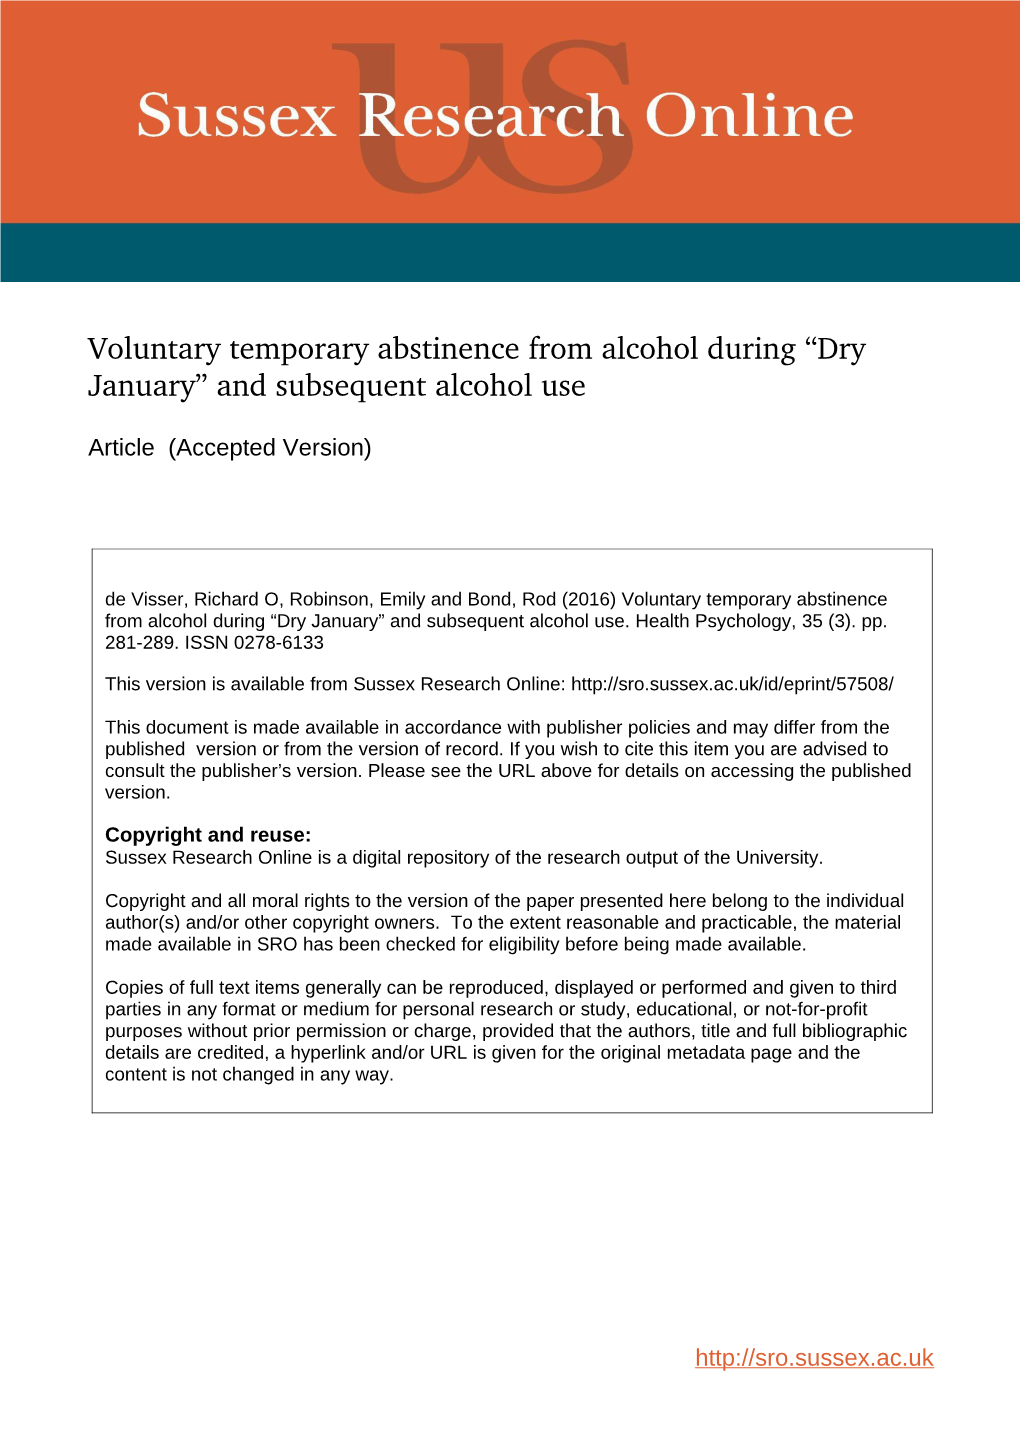 Voluntary Temporary Abstinence from Alcohol During “Dry January” and Subsequent Alcohol Use